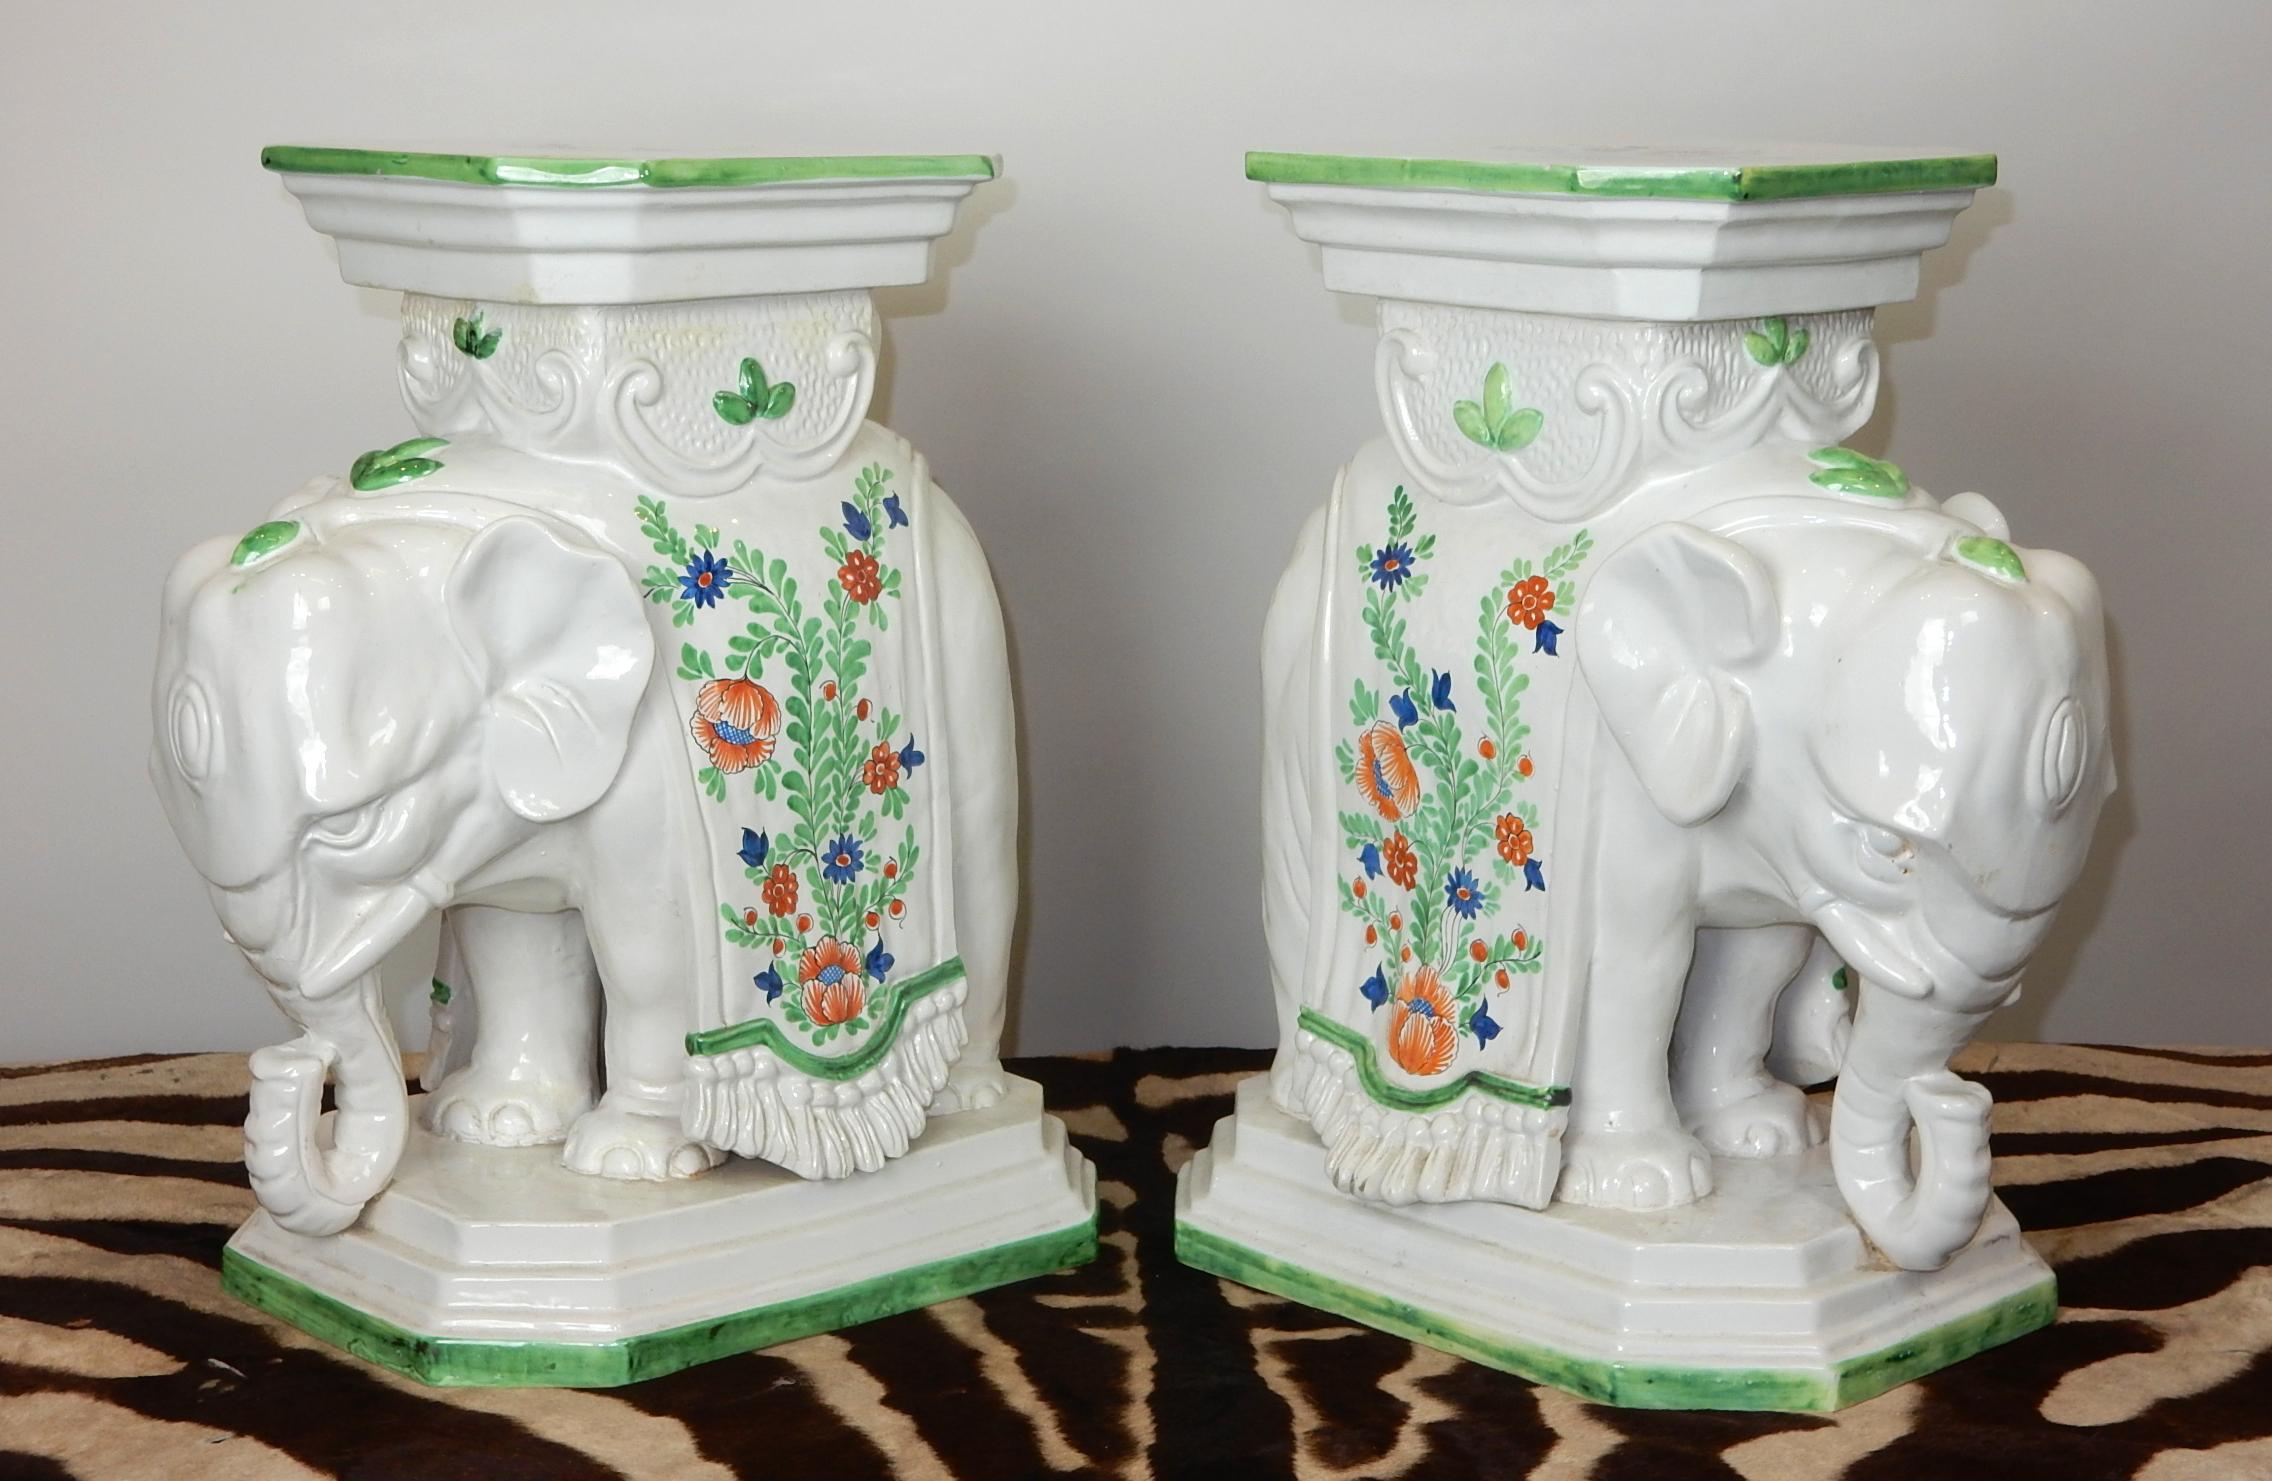 Lovely pair with hand painted floral design. Milky white glaze.
Signed Italy and A/B on bottom. No cracks or damage. 
Solid and sturdy.